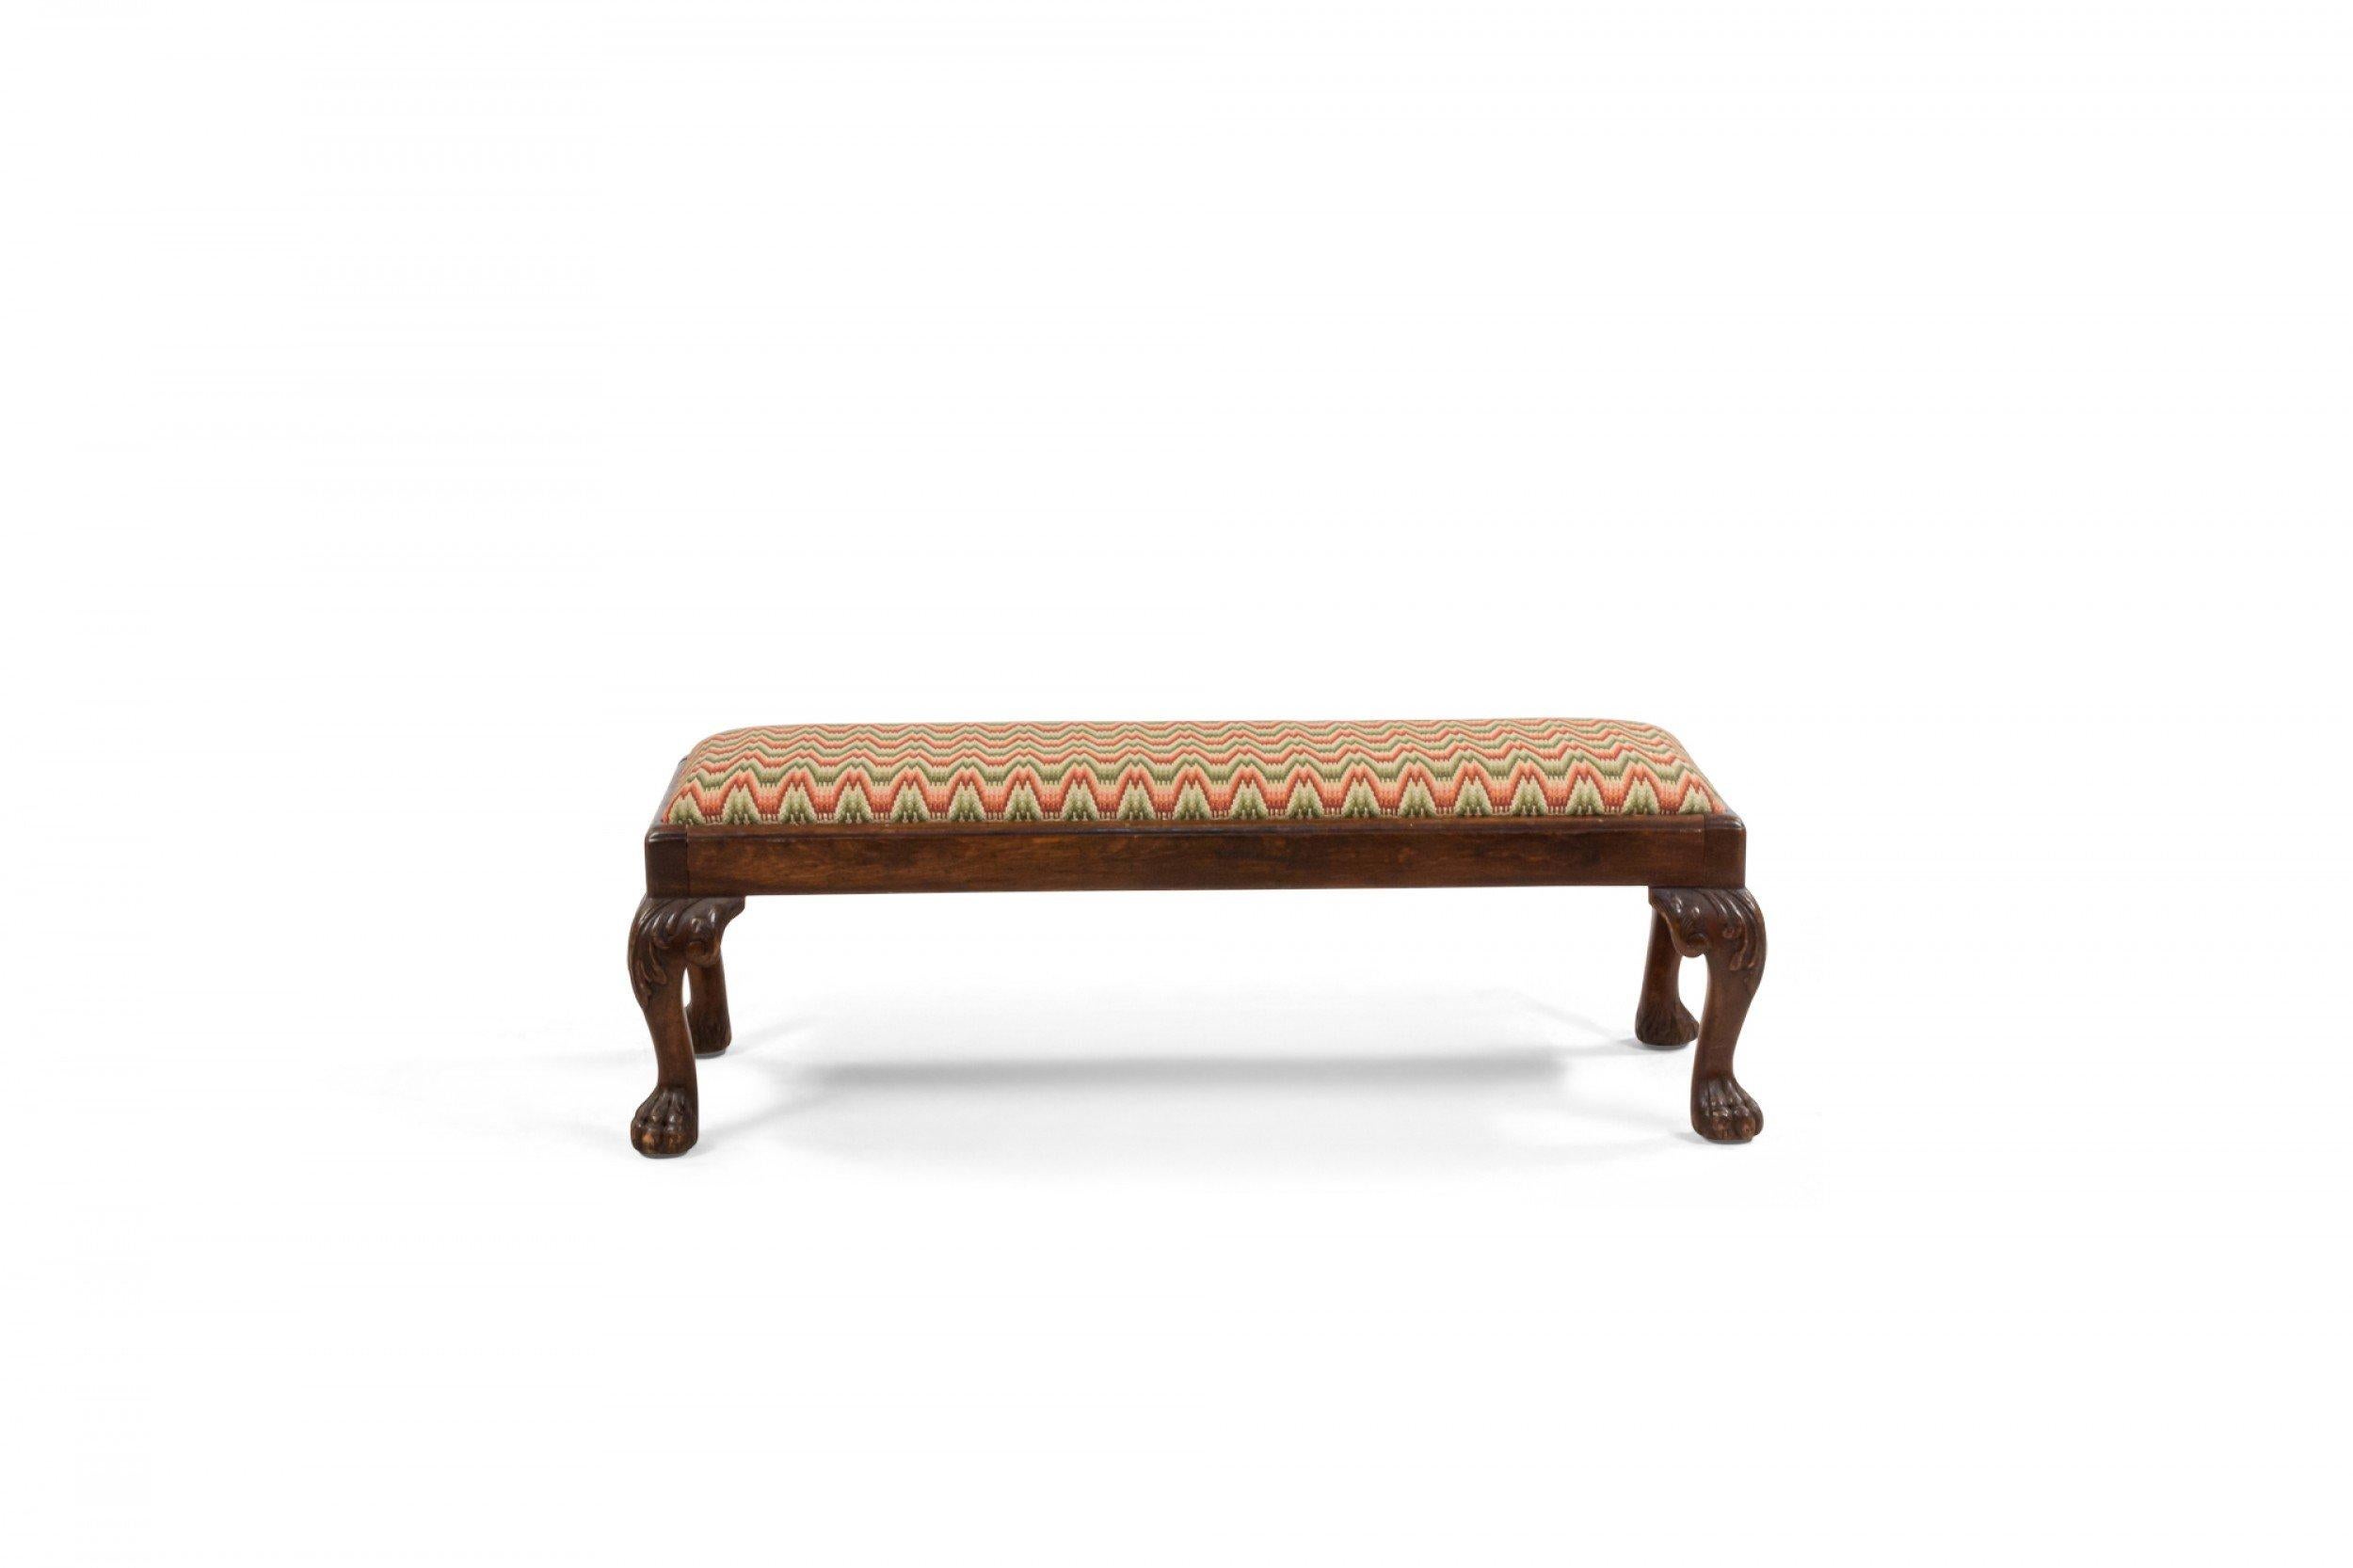 19th Century English Georgian style low mahogany bench with carved cabriole legs and a bargello needlepoint upholstered top.